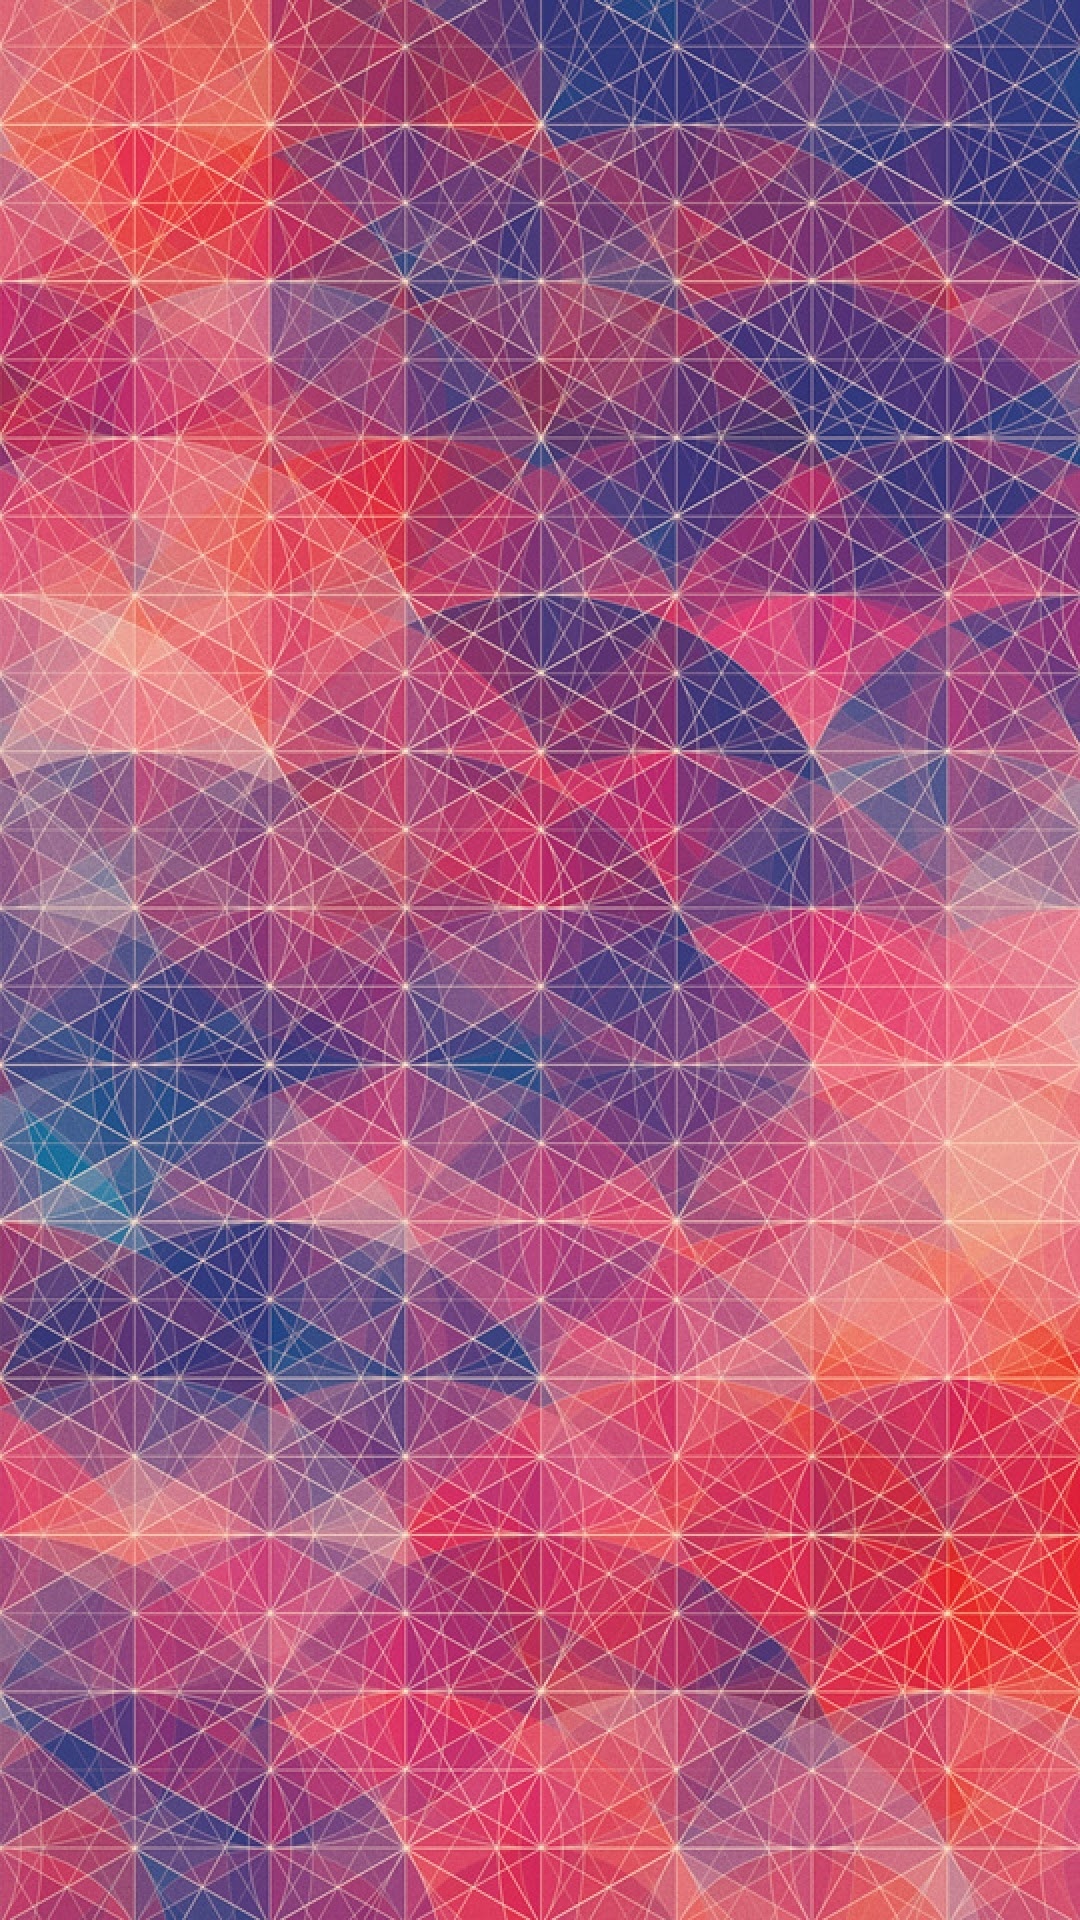 Golden Ratio: Abstract geometric ornament, Polygonal figures, Line segments, Multicolored. 1080x1920 Full HD Background.